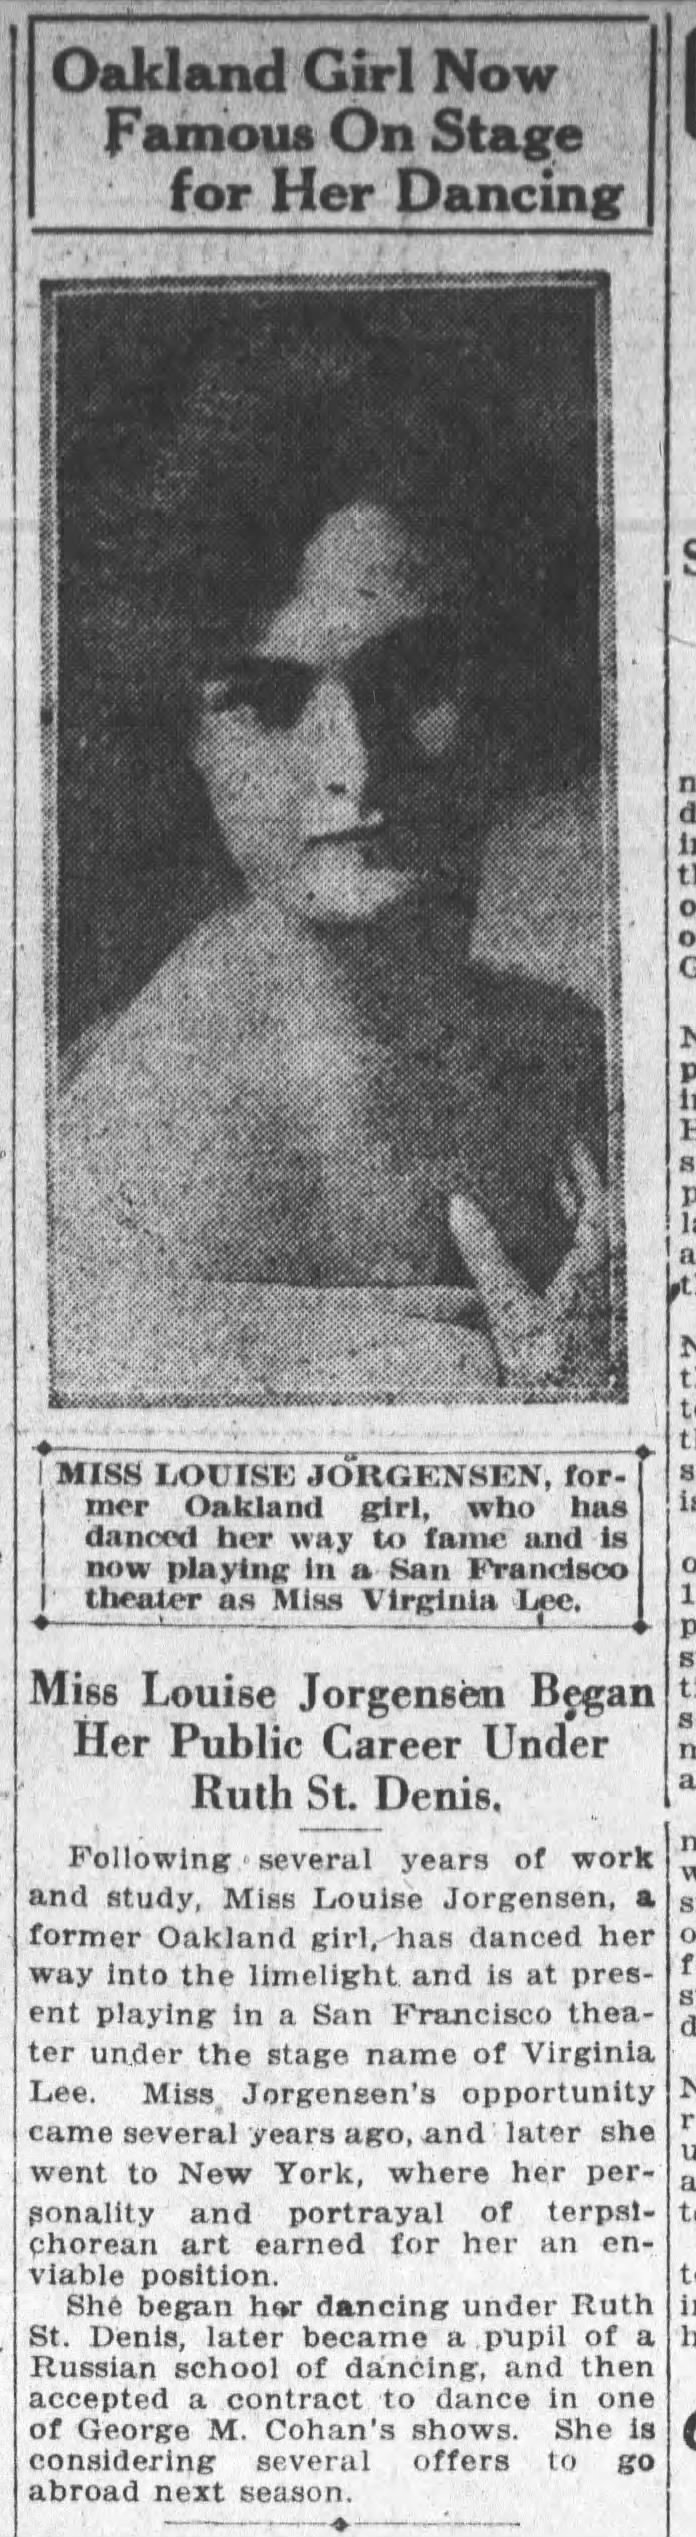 Louise Jorgensen -- now famous for her dancing